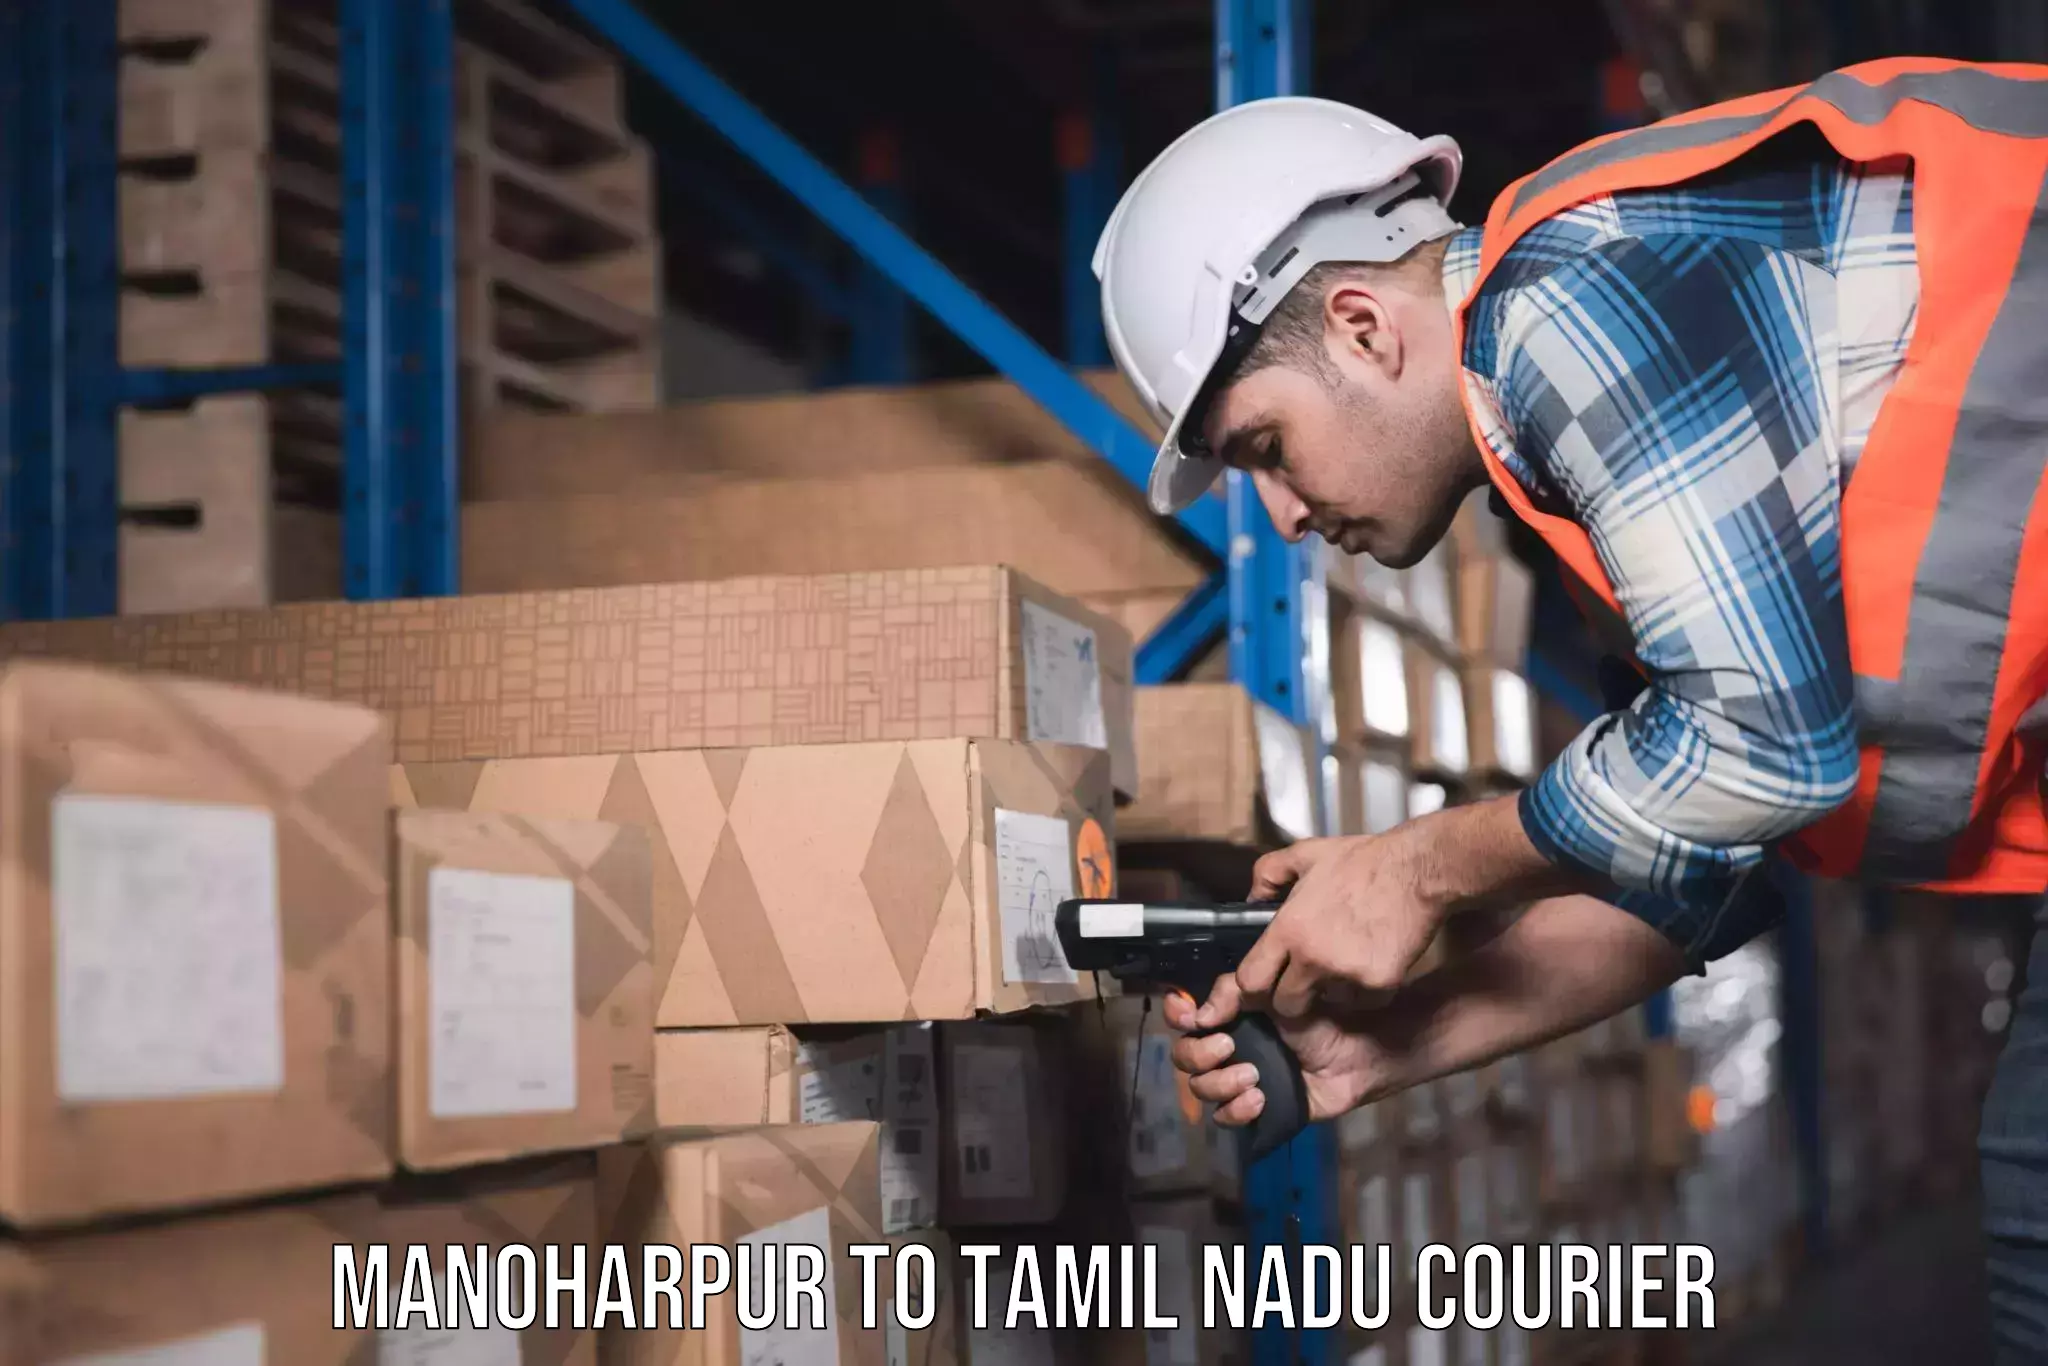 Budget-friendly movers Manoharpur to Ennore Port Chennai